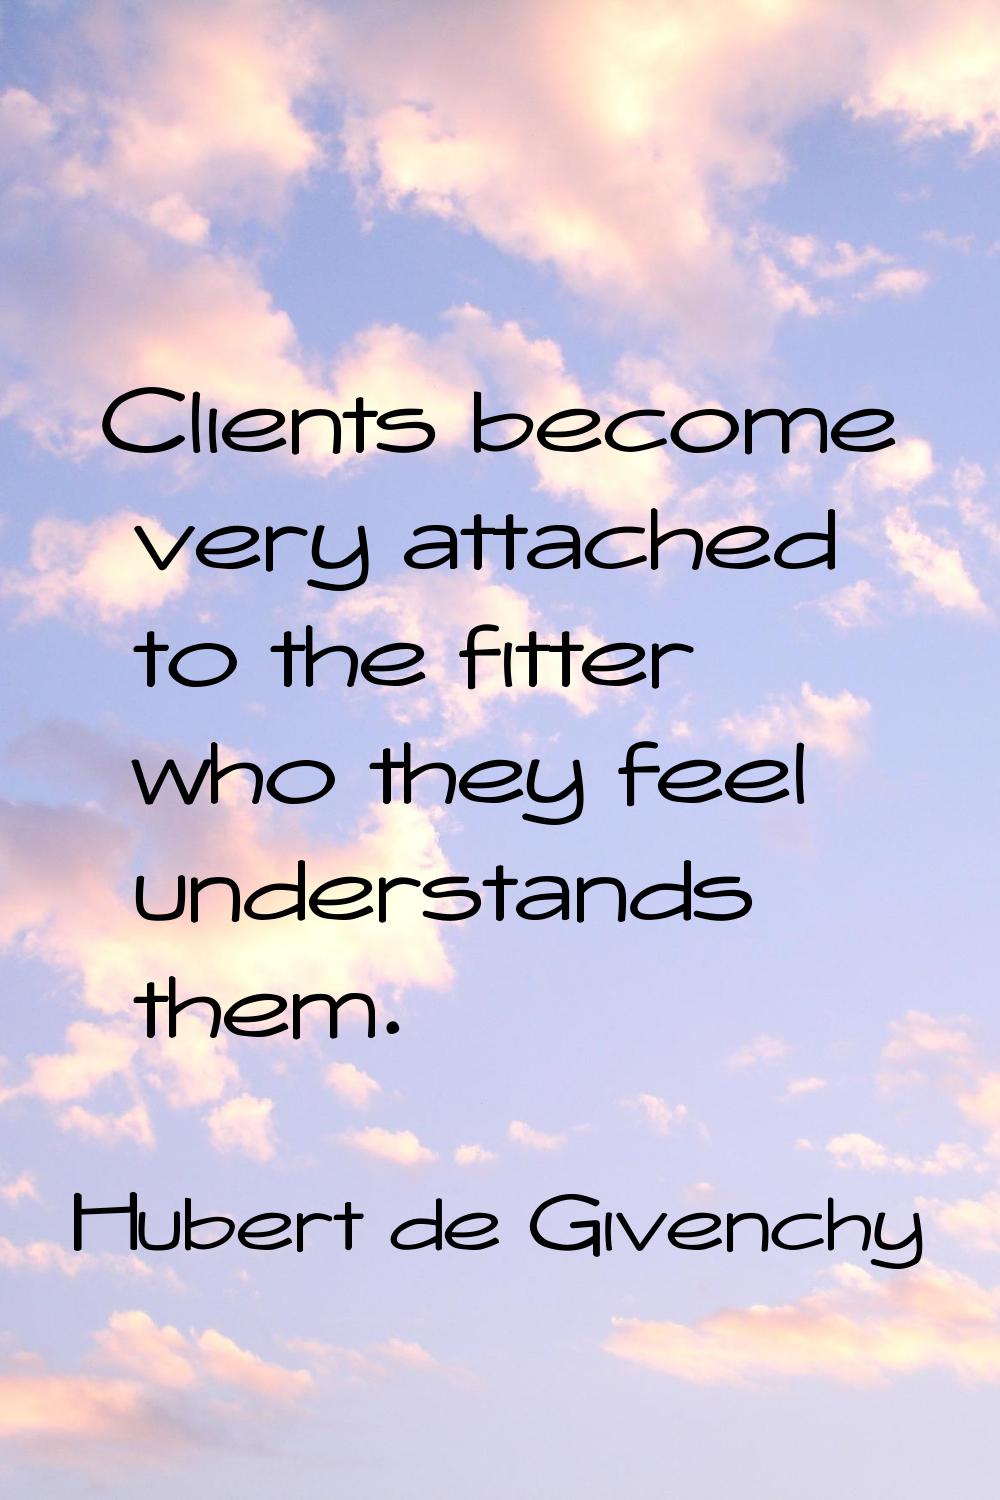 Clients become very attached to the fitter who they feel understands them.